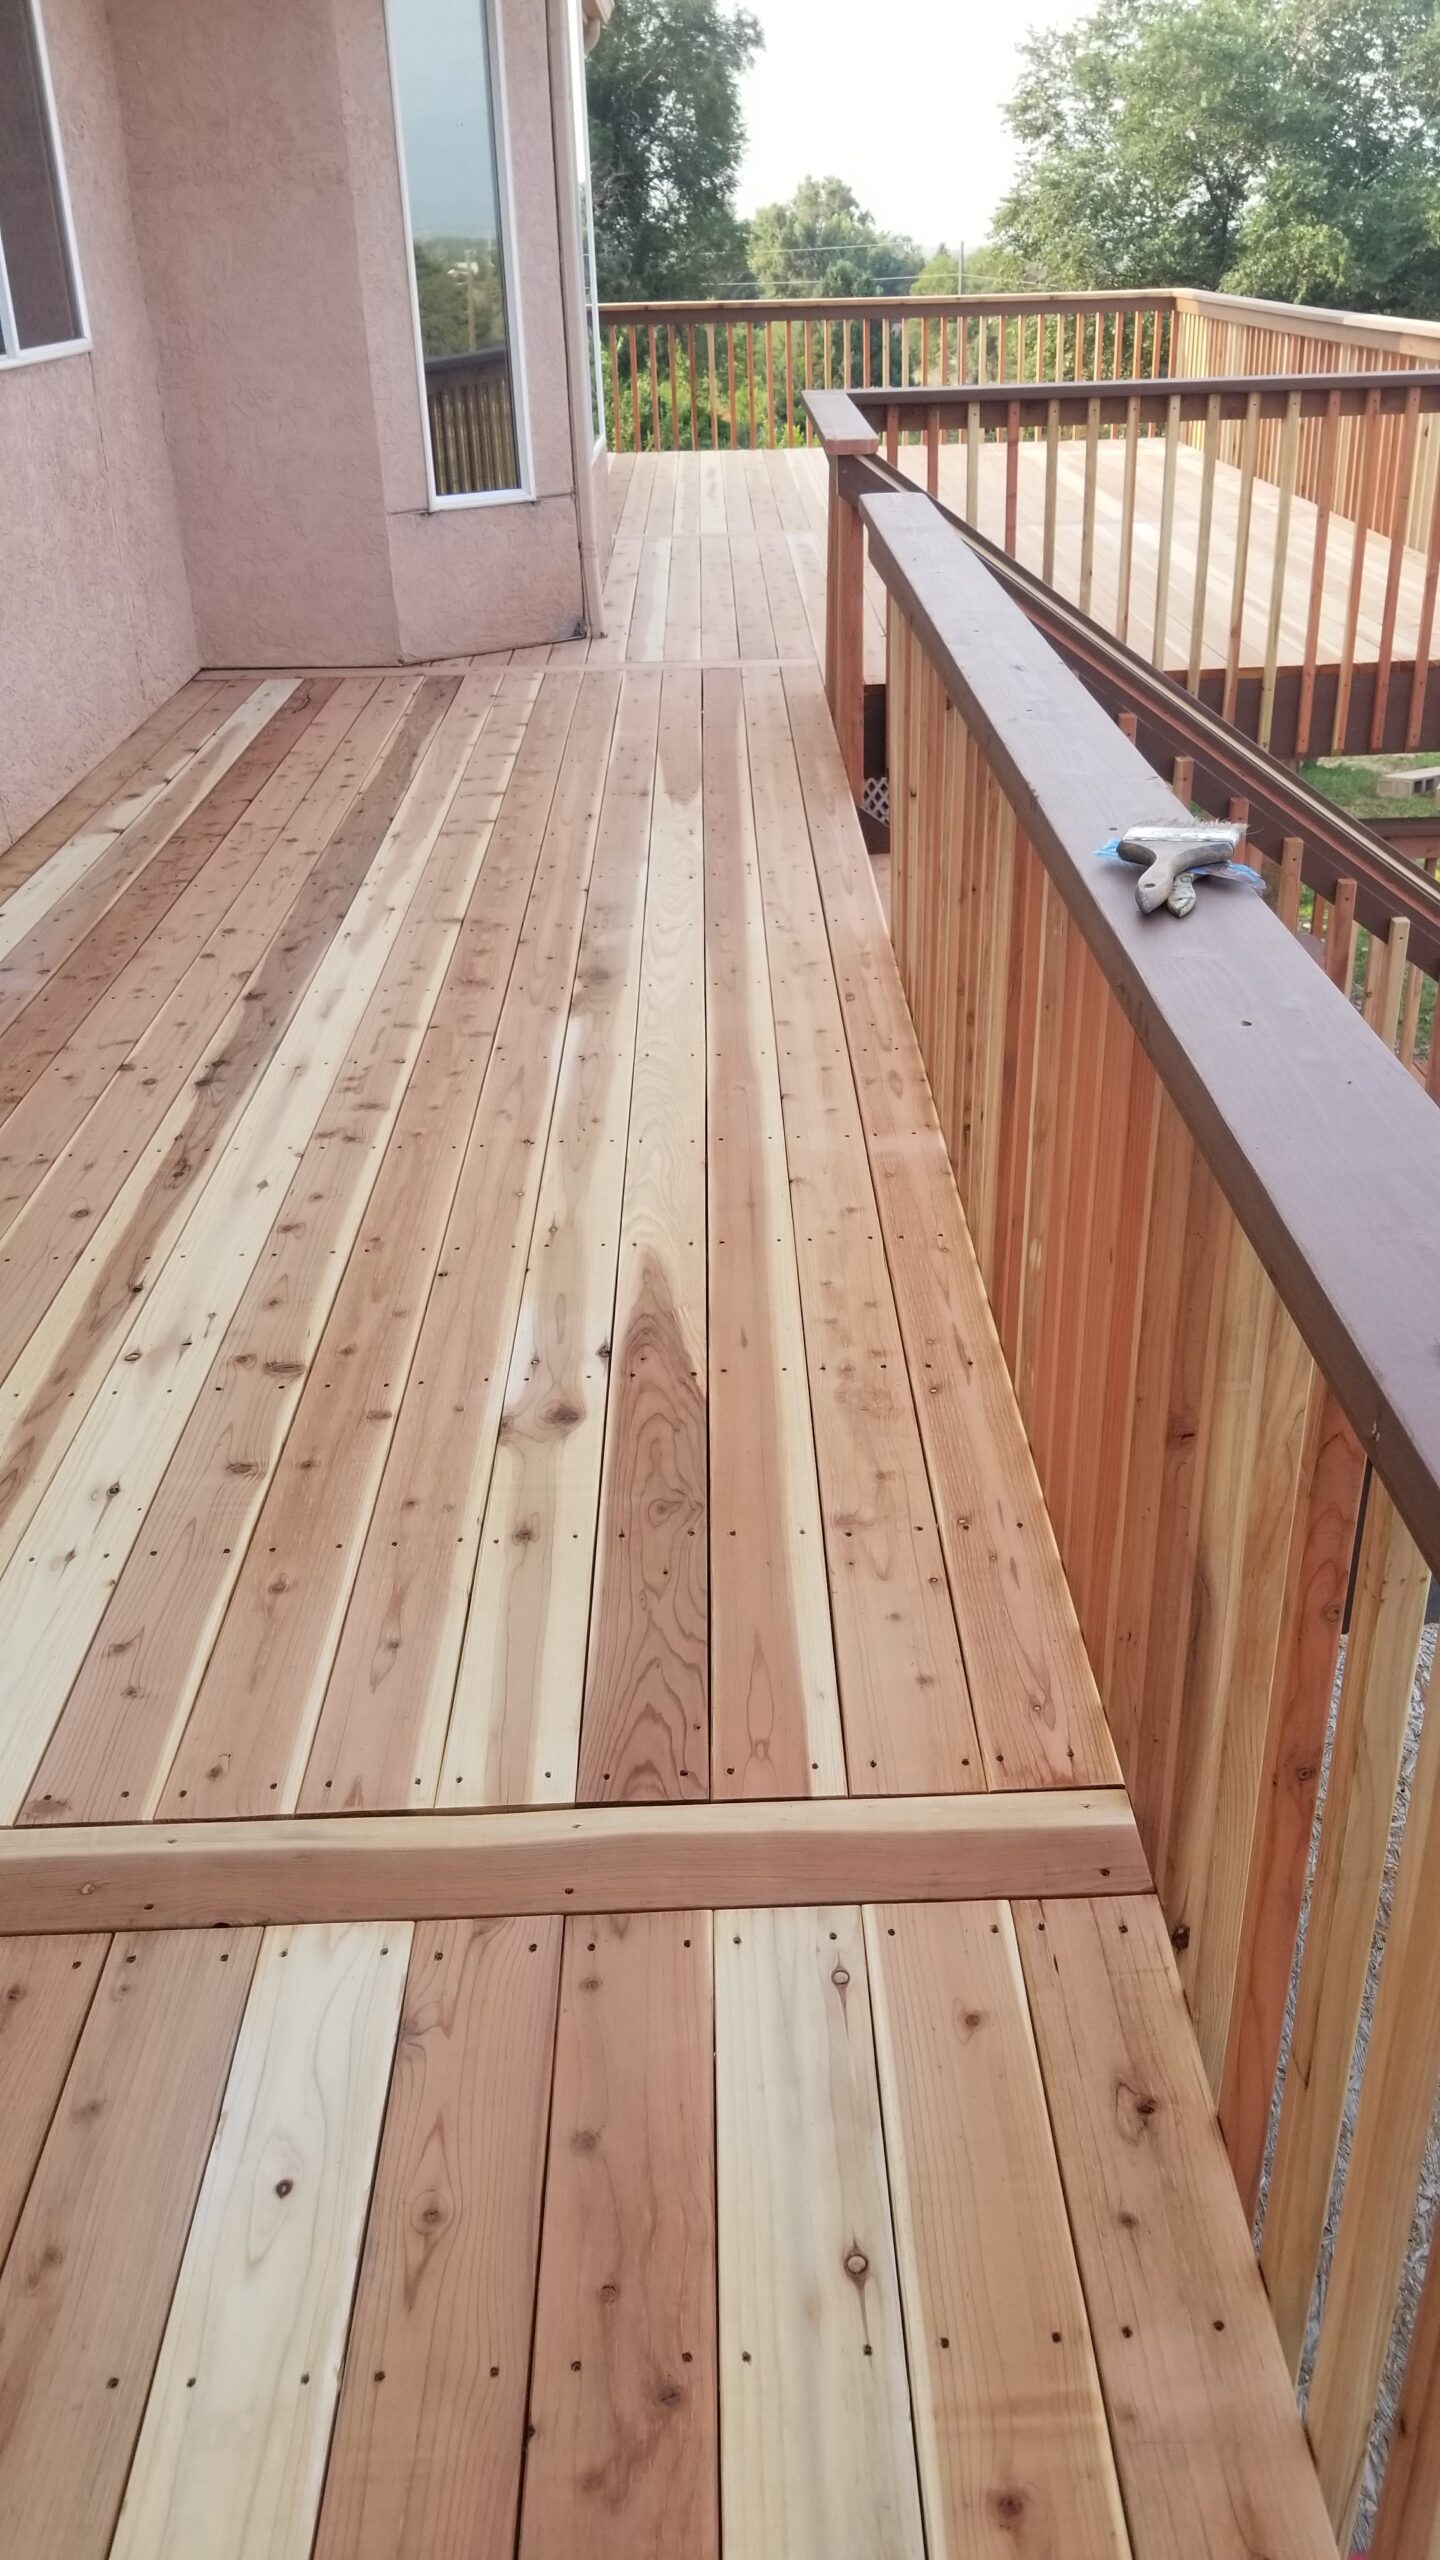 Redwood deck and railing with single divider boards, before staining.